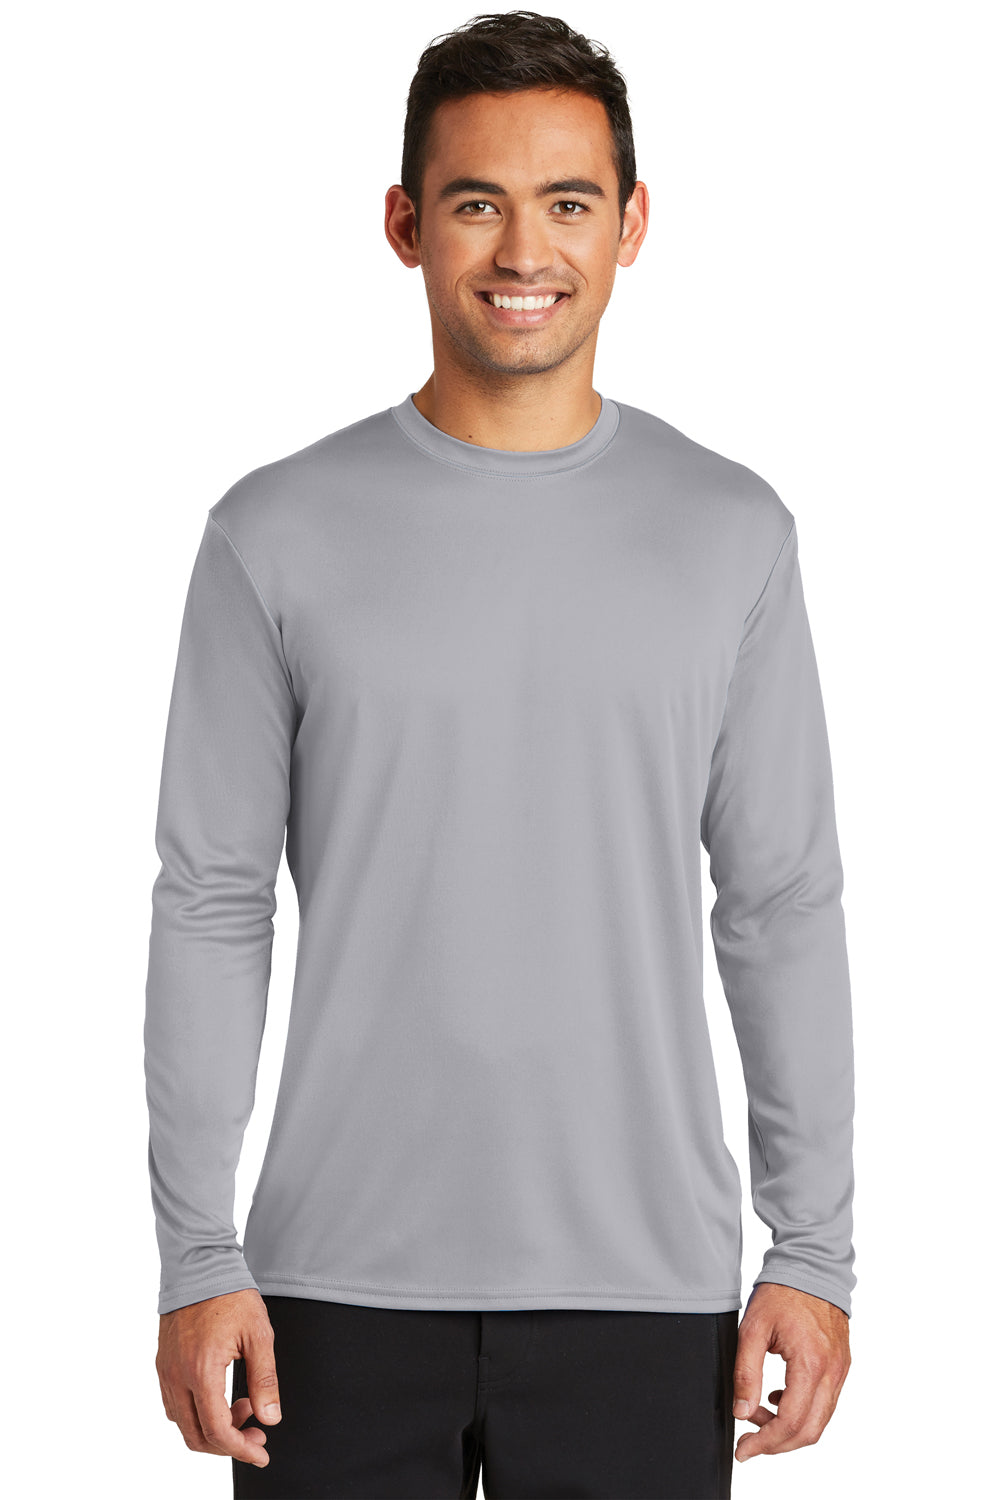 Port & Company PC380LS Mens Dry Zone Performance Moisture Wicking Long Sleeve Crewneck T-Shirt Silver Grey Front